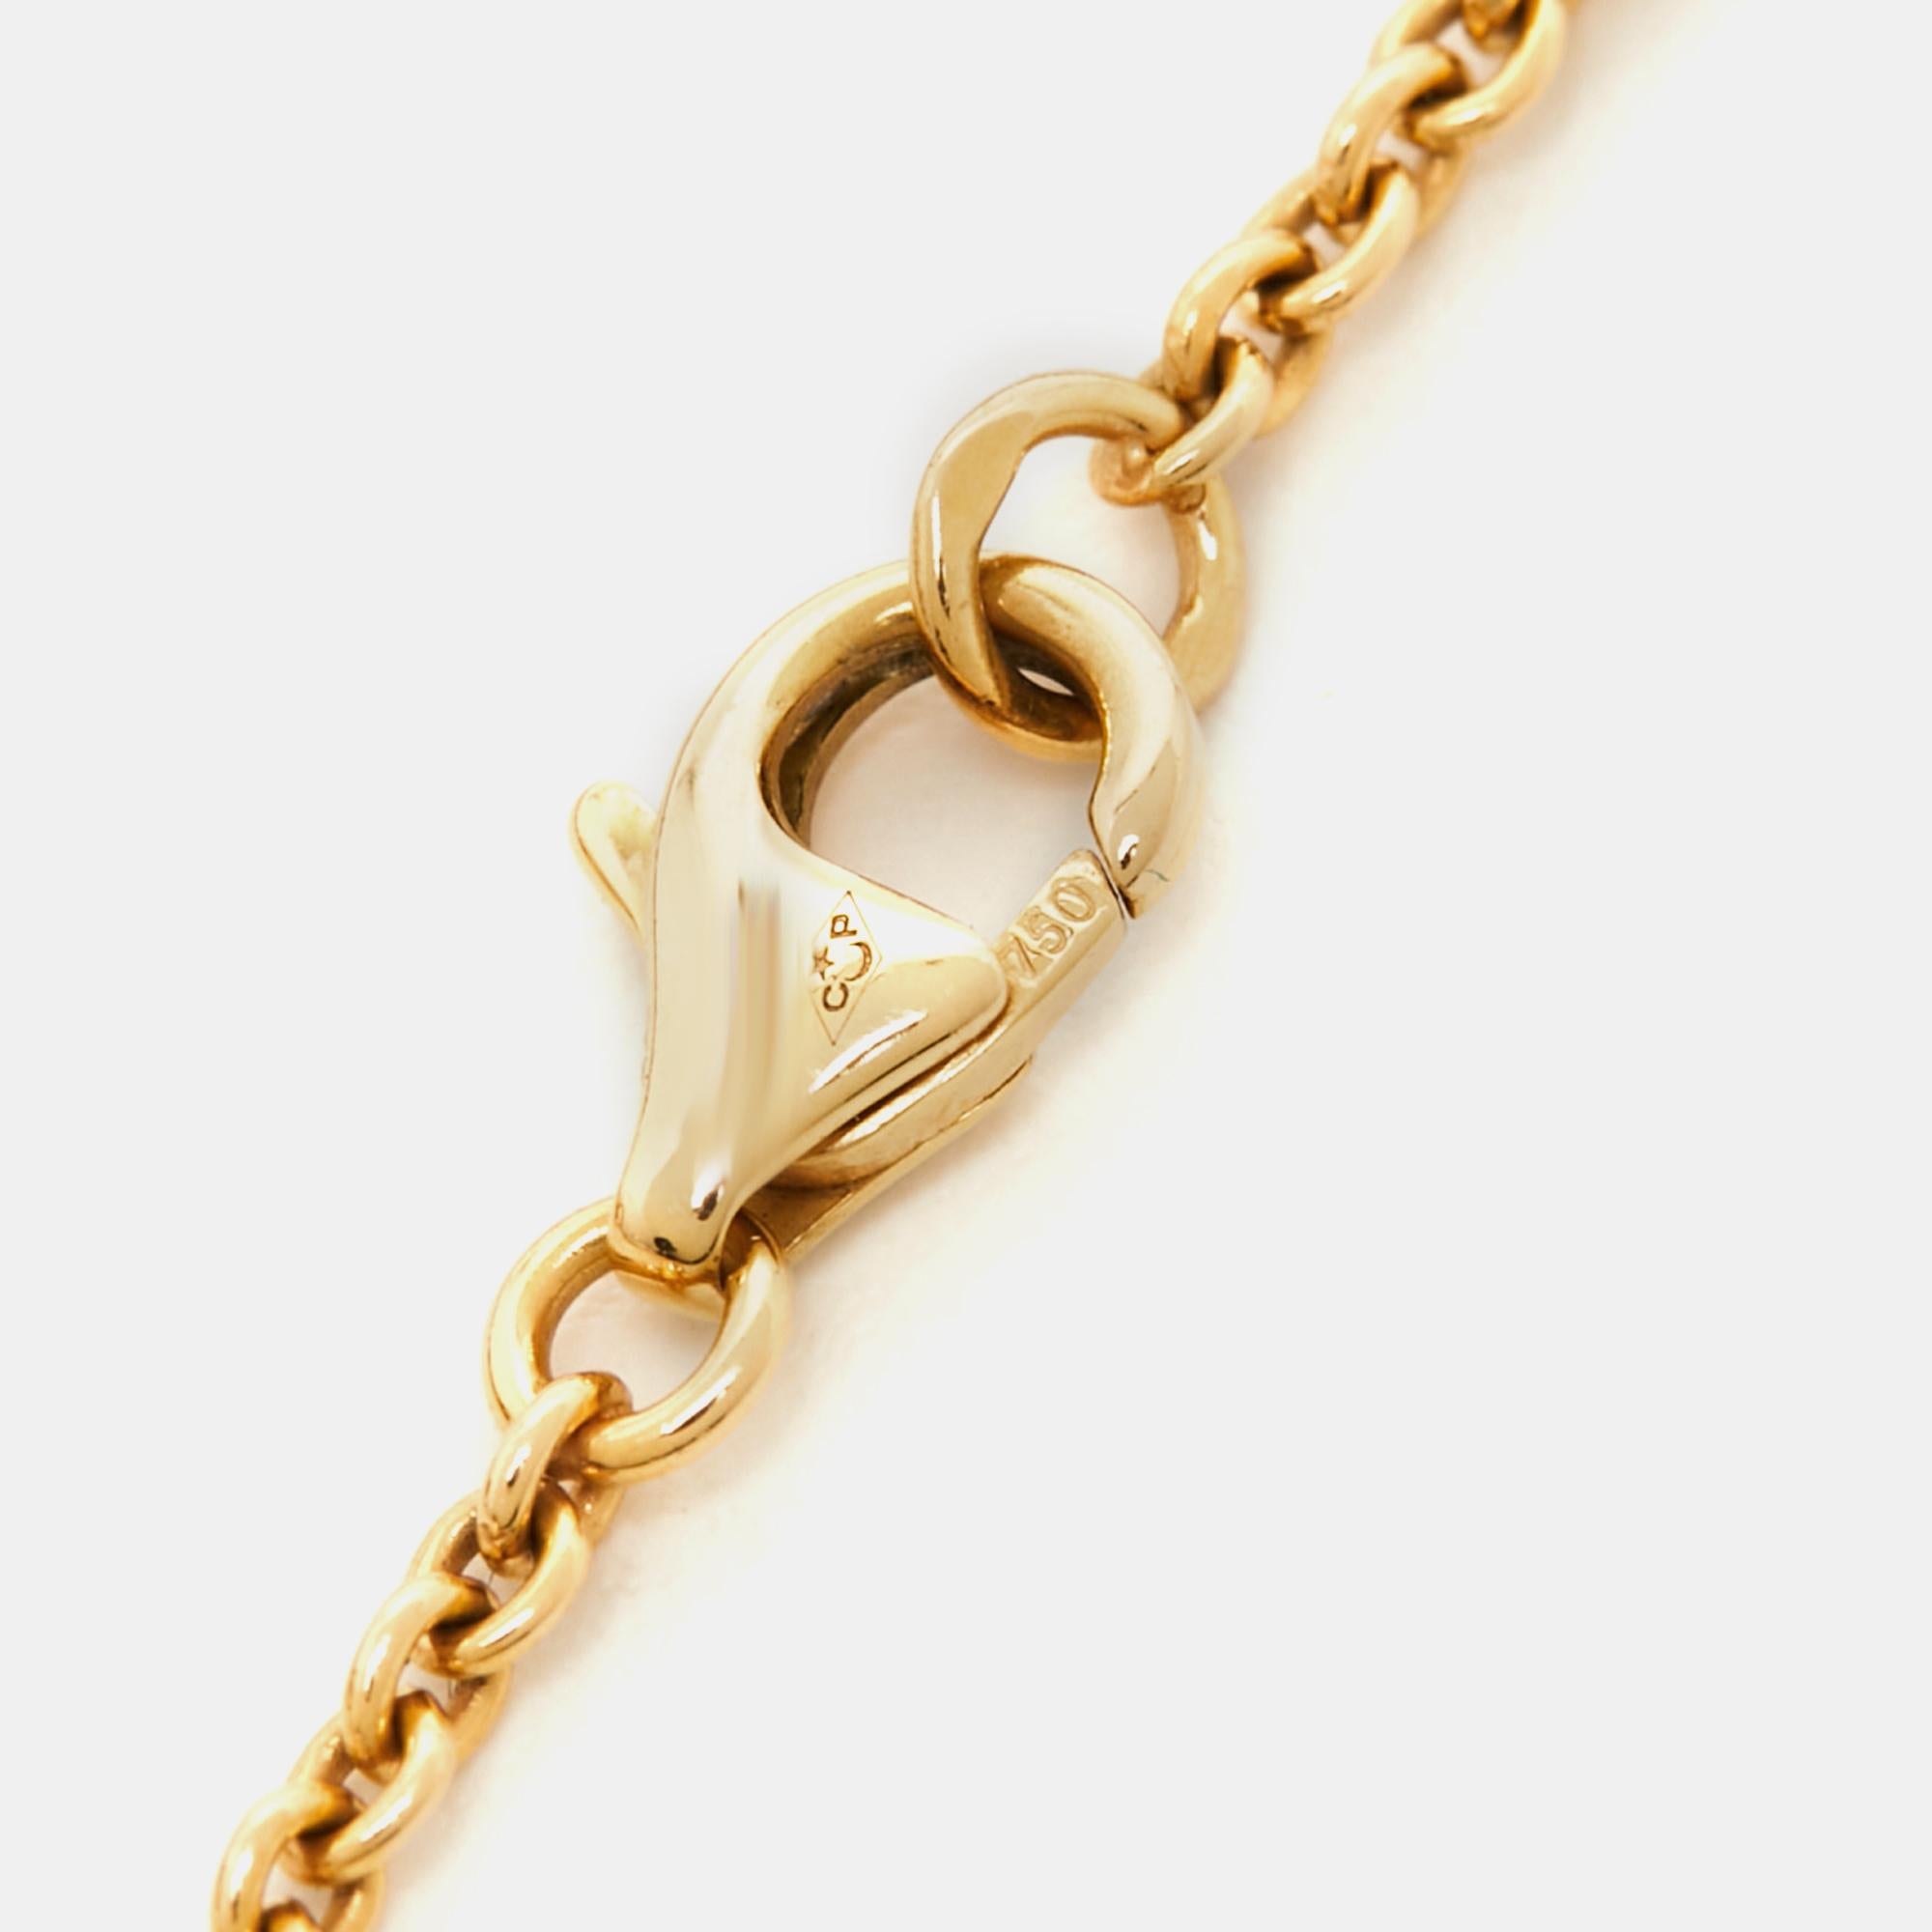 Celebrate timeless love with this bracelet from Cartier's Love collection. Made from 18k yellow gold, it has a chain that holds two magnificent rings interlocked with one another. On both, one can see the iconic screw motifs which are a signature of